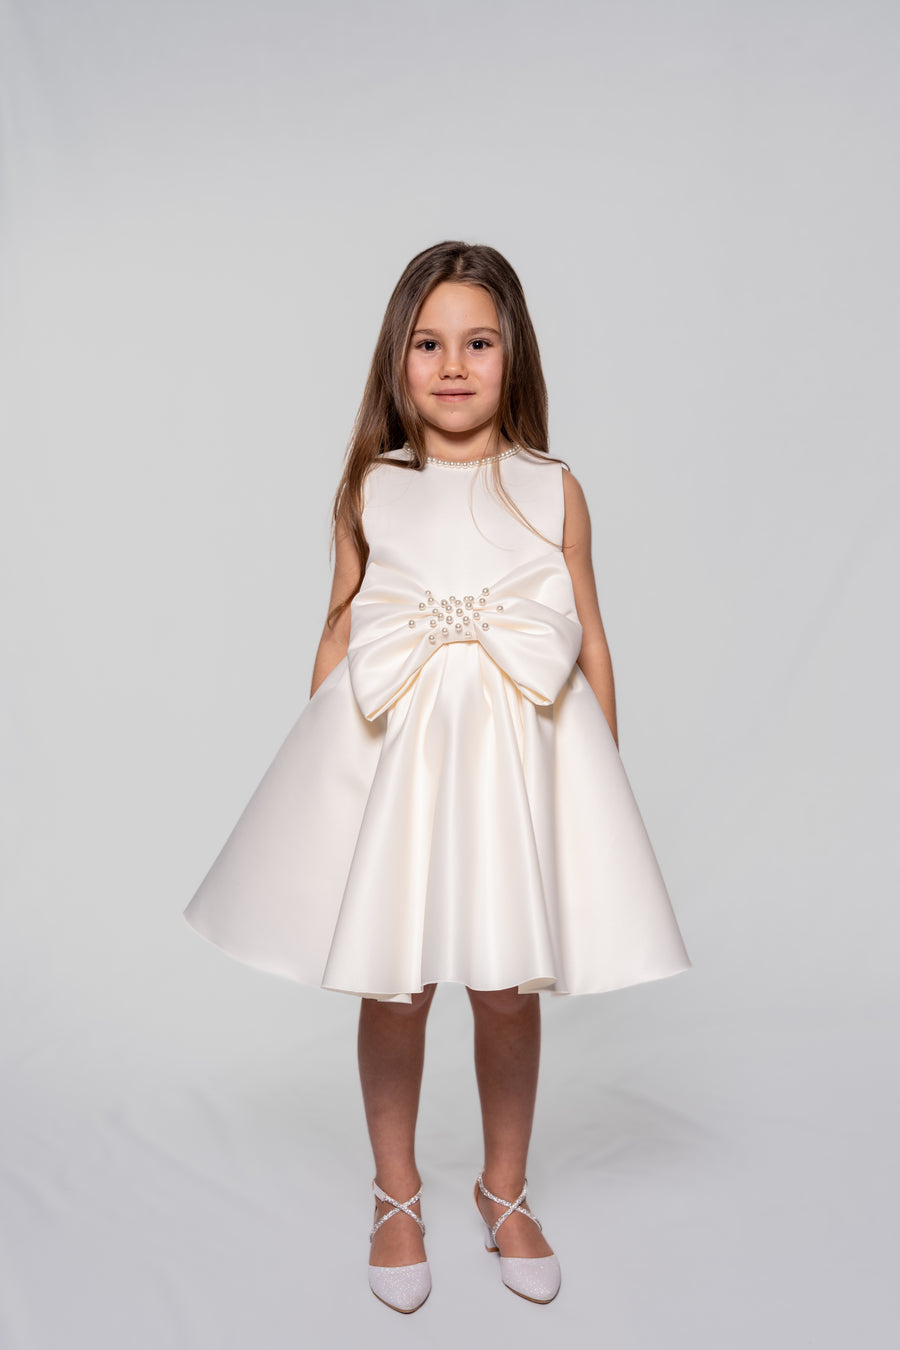 White satin dress with pearl embellished ribbon